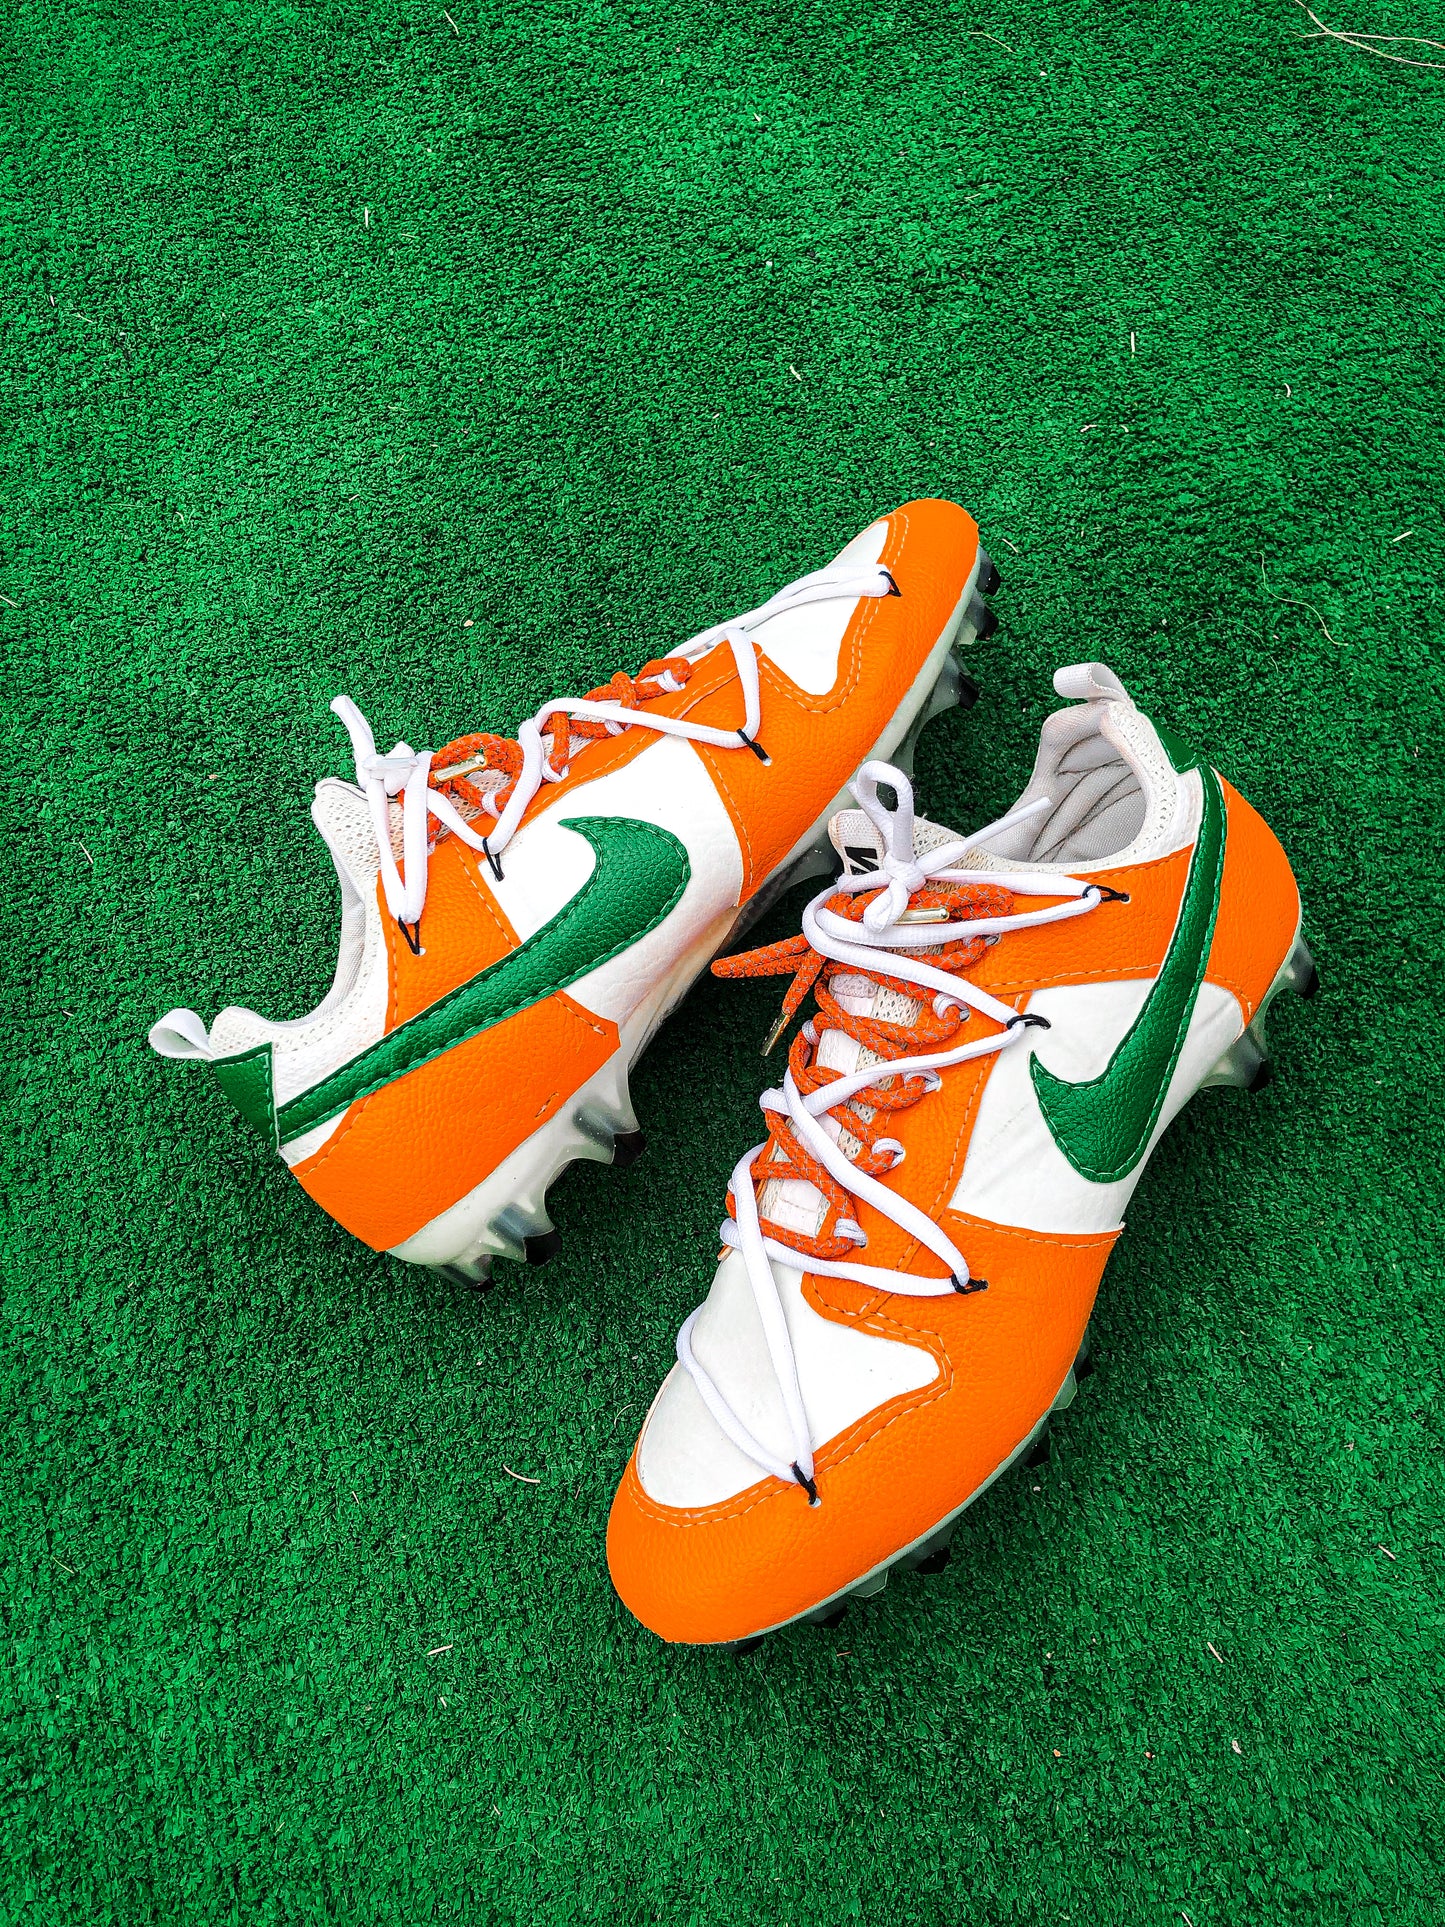 Customs and Concepts: Swoosh Customs - Soccer Cleats 101